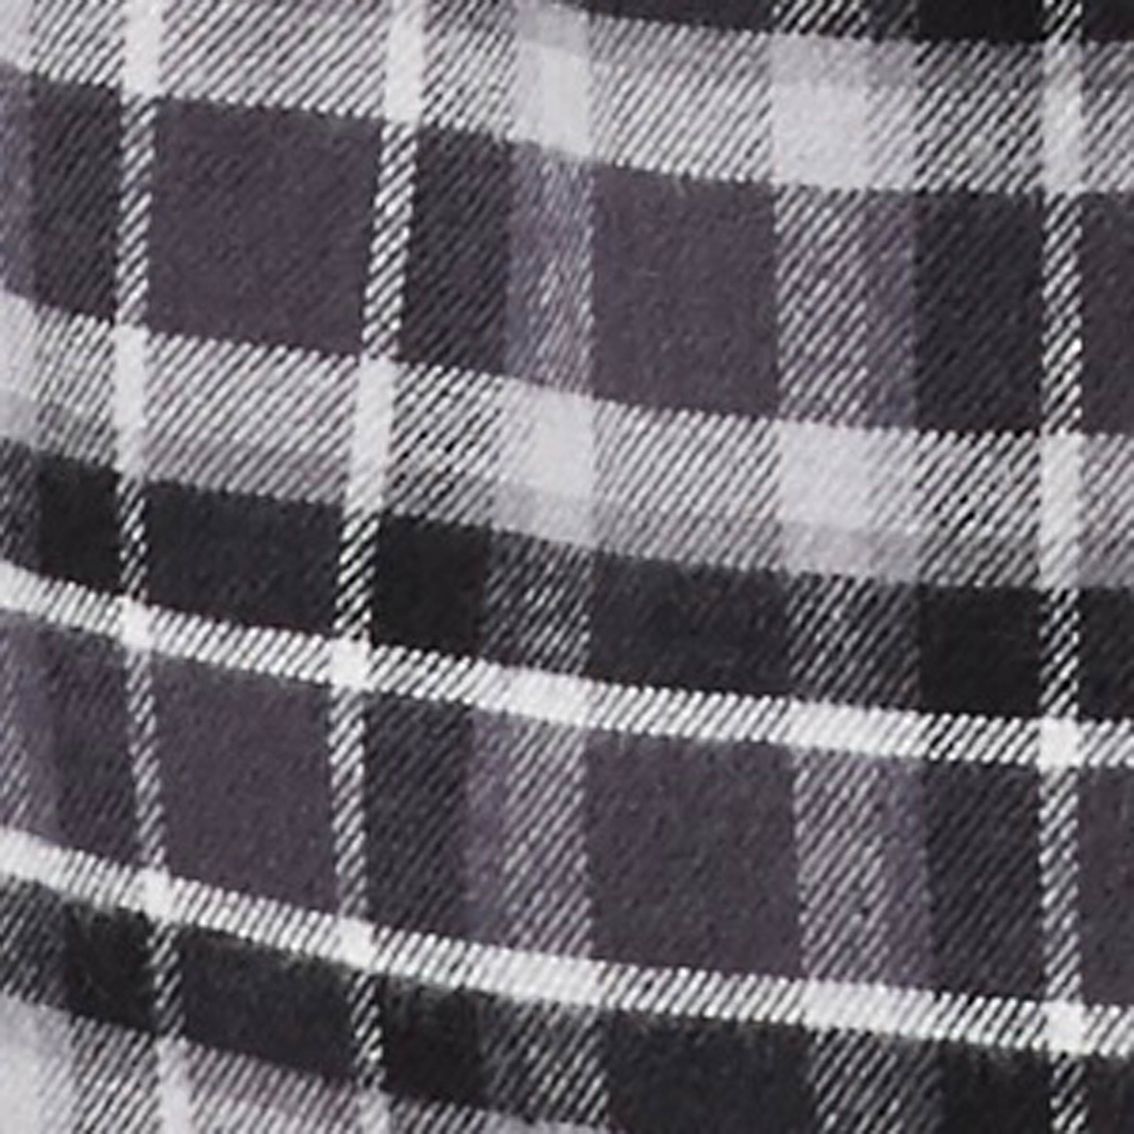 Columbia Flare Gun Stretch Flannel - Image 4 of 4